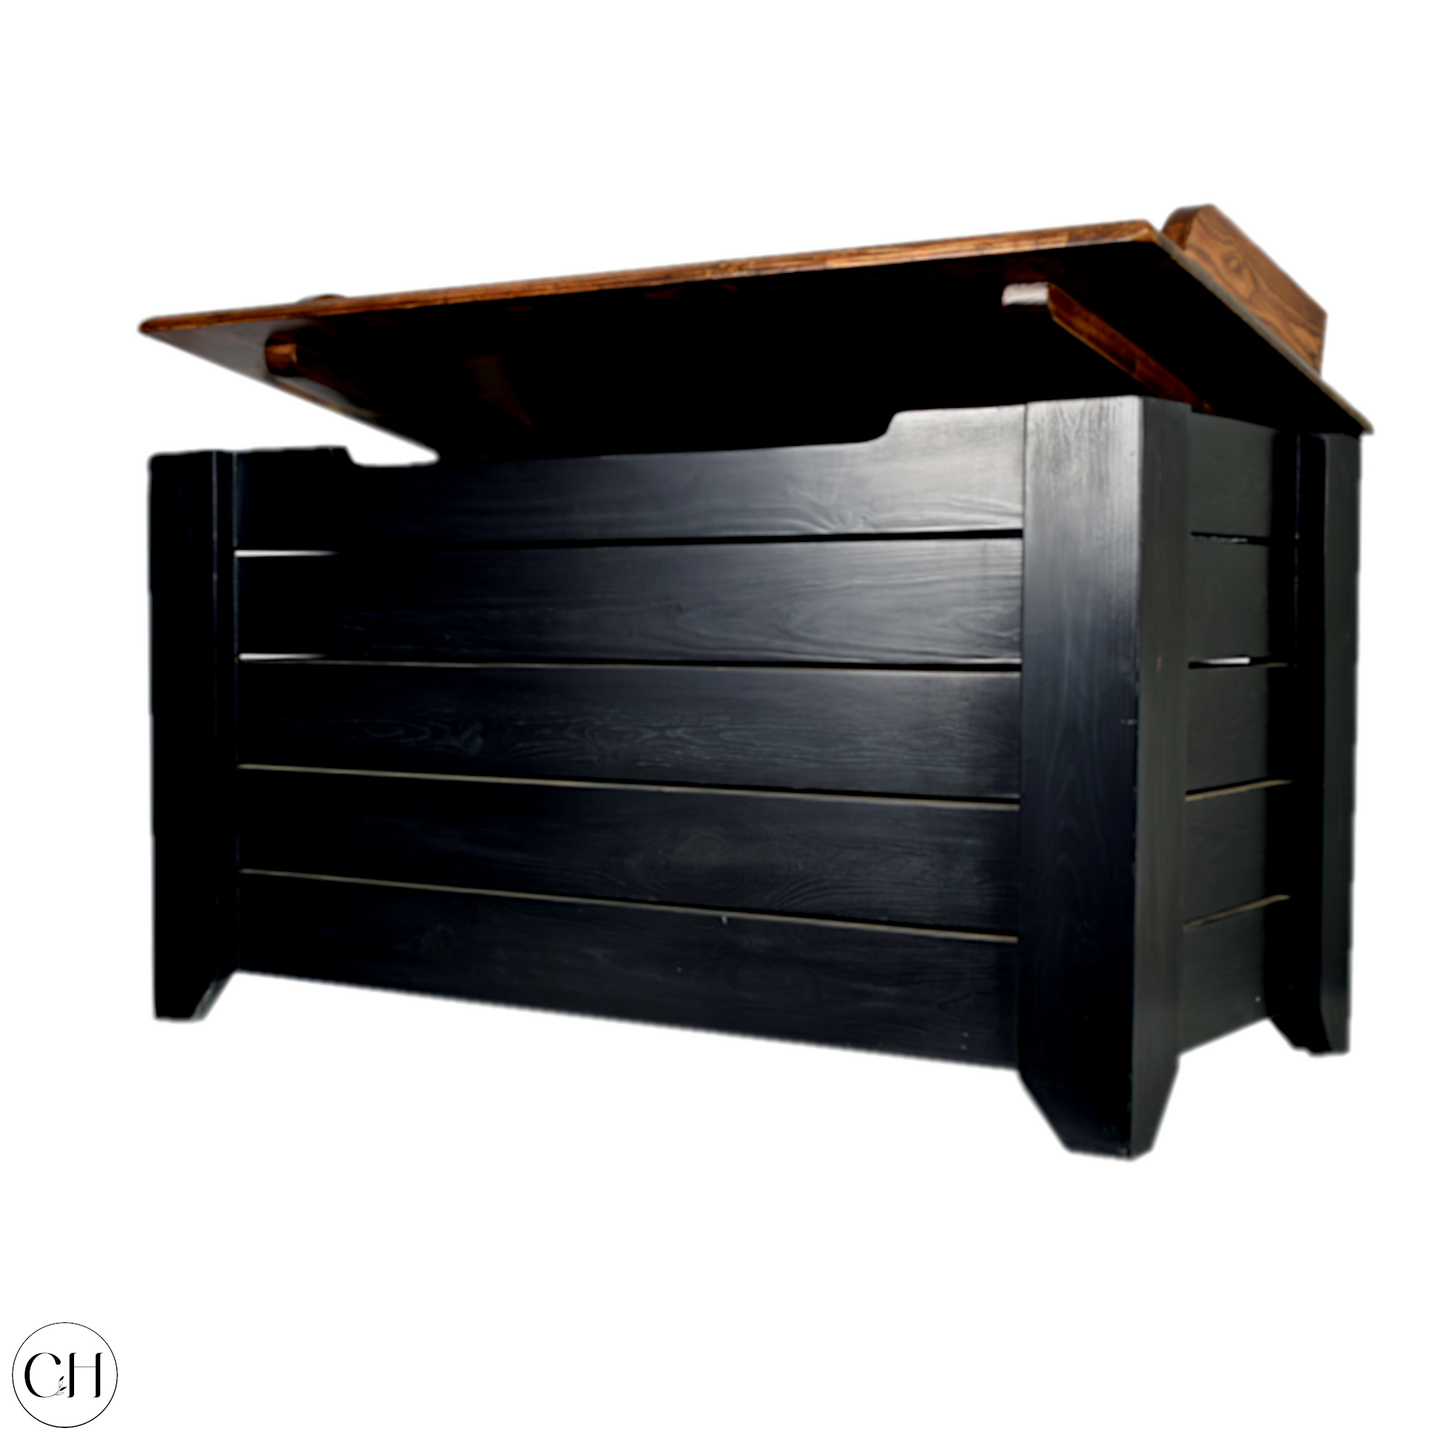 CustHum - Coucal - Large wooden storage box with thin backrest on the opening flap (black and wood color, open ISO view)